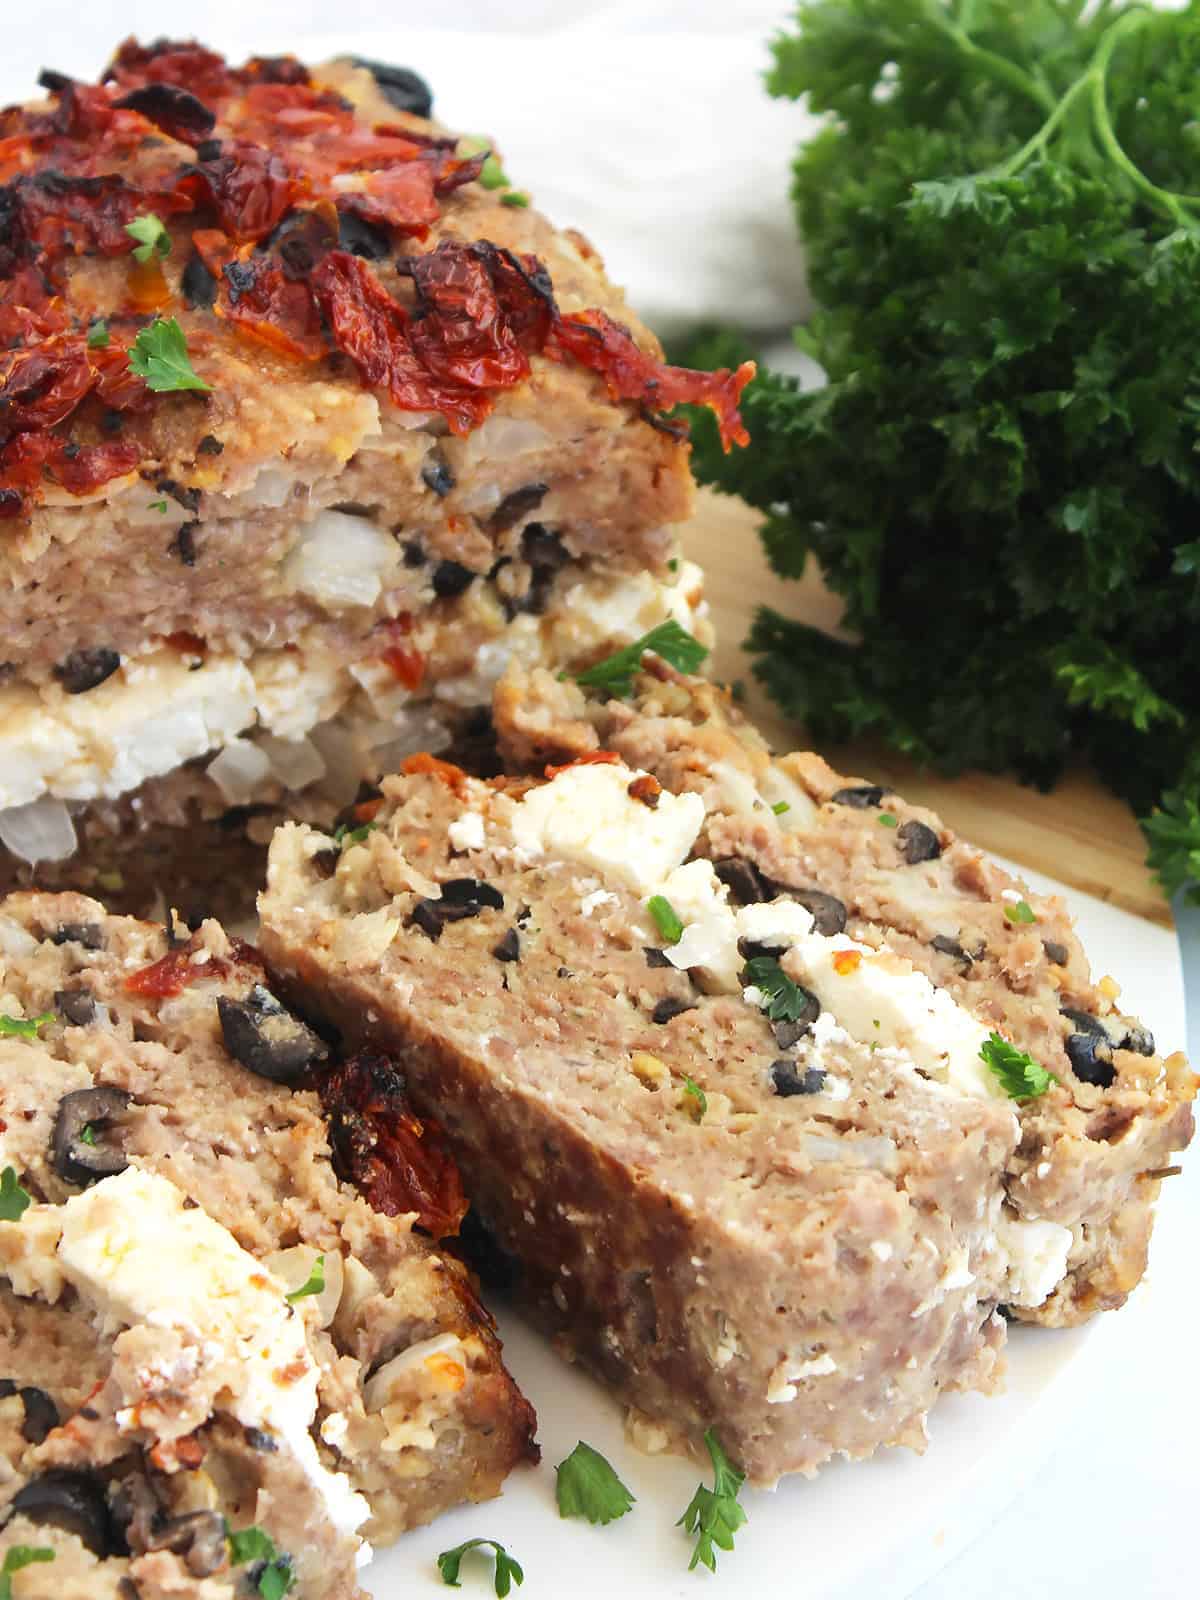 Ground lamb meatloaf with feta and olives on a cutting board.